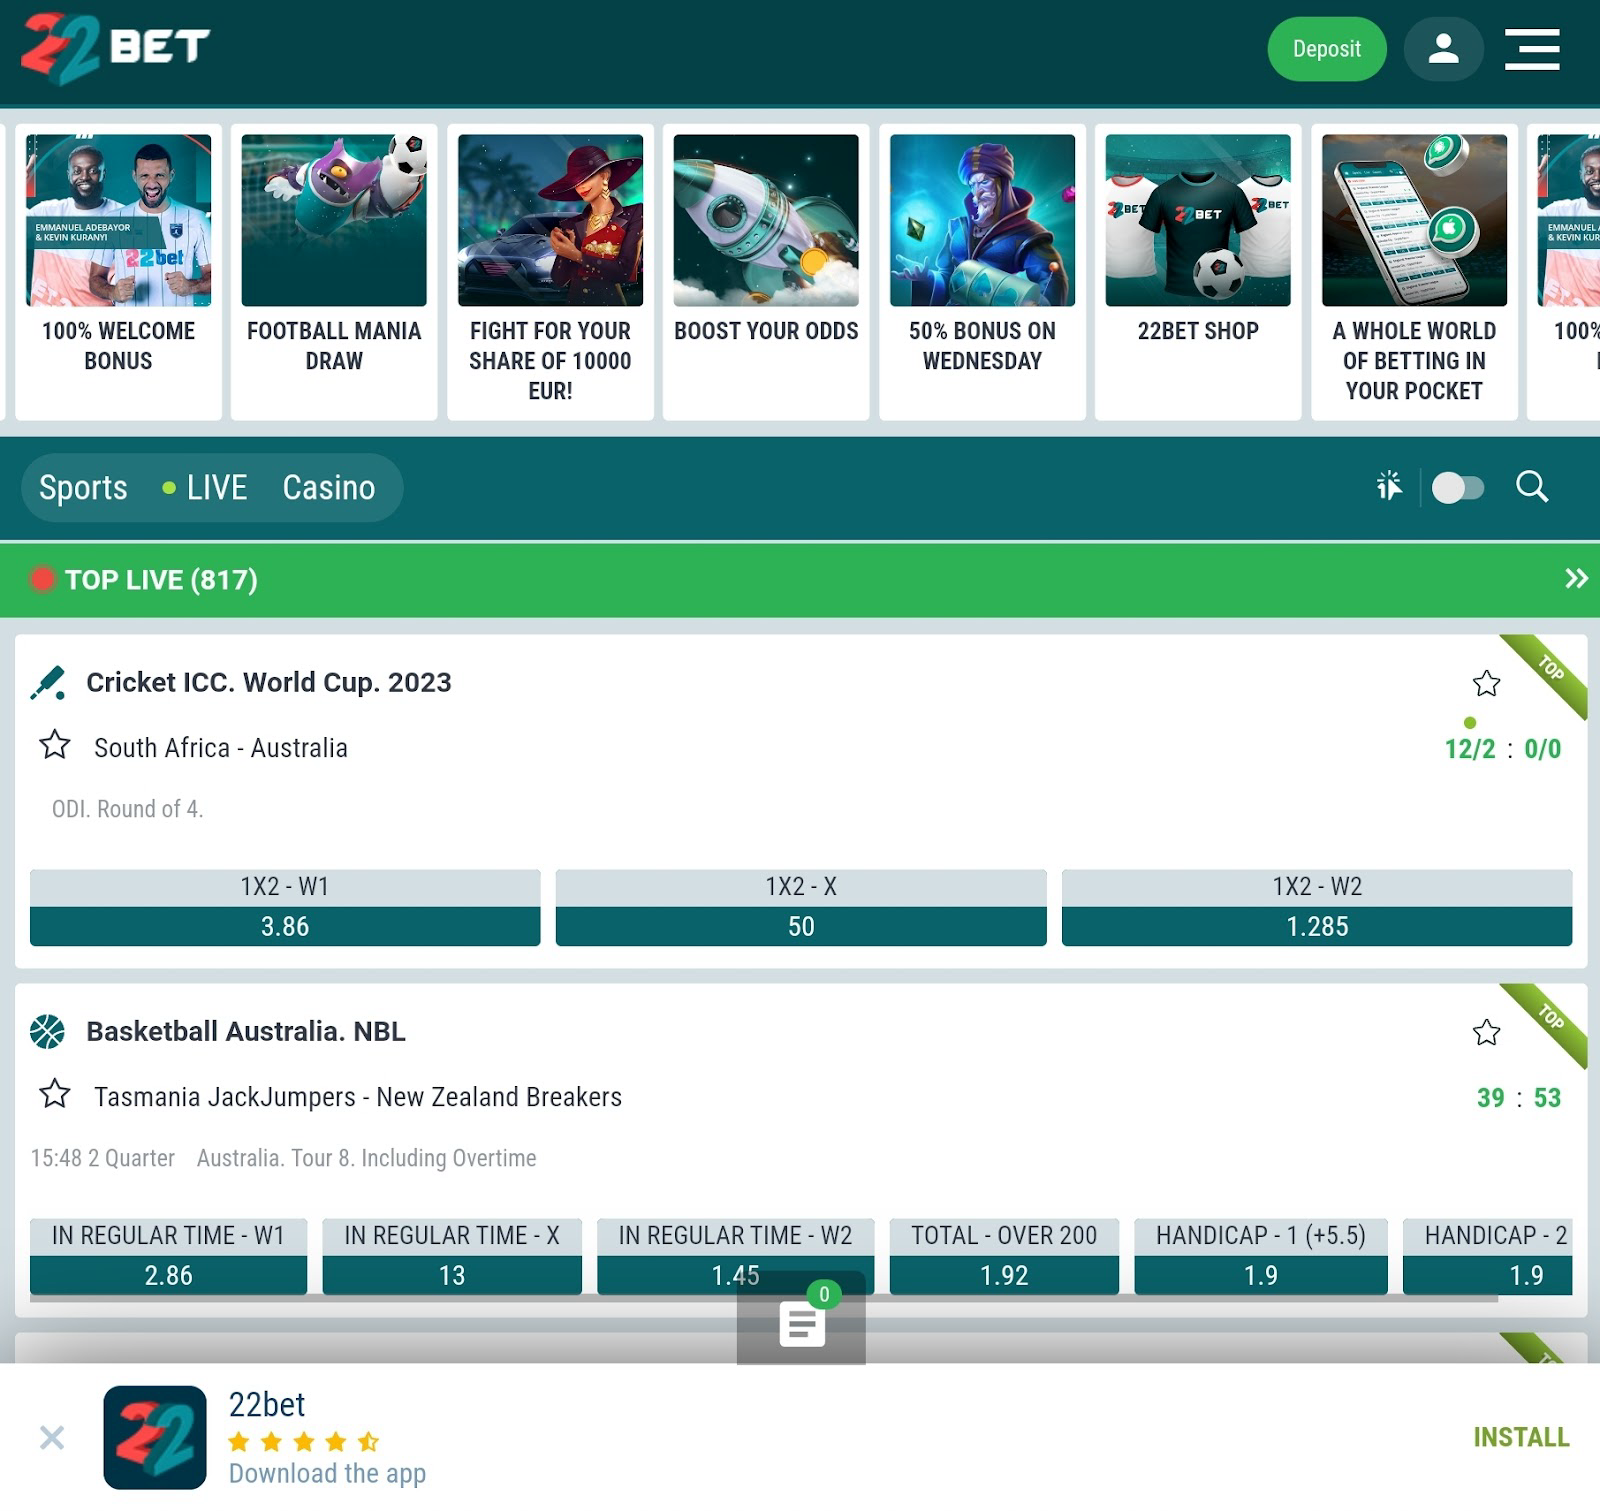 22Bet Homepage on Mobile